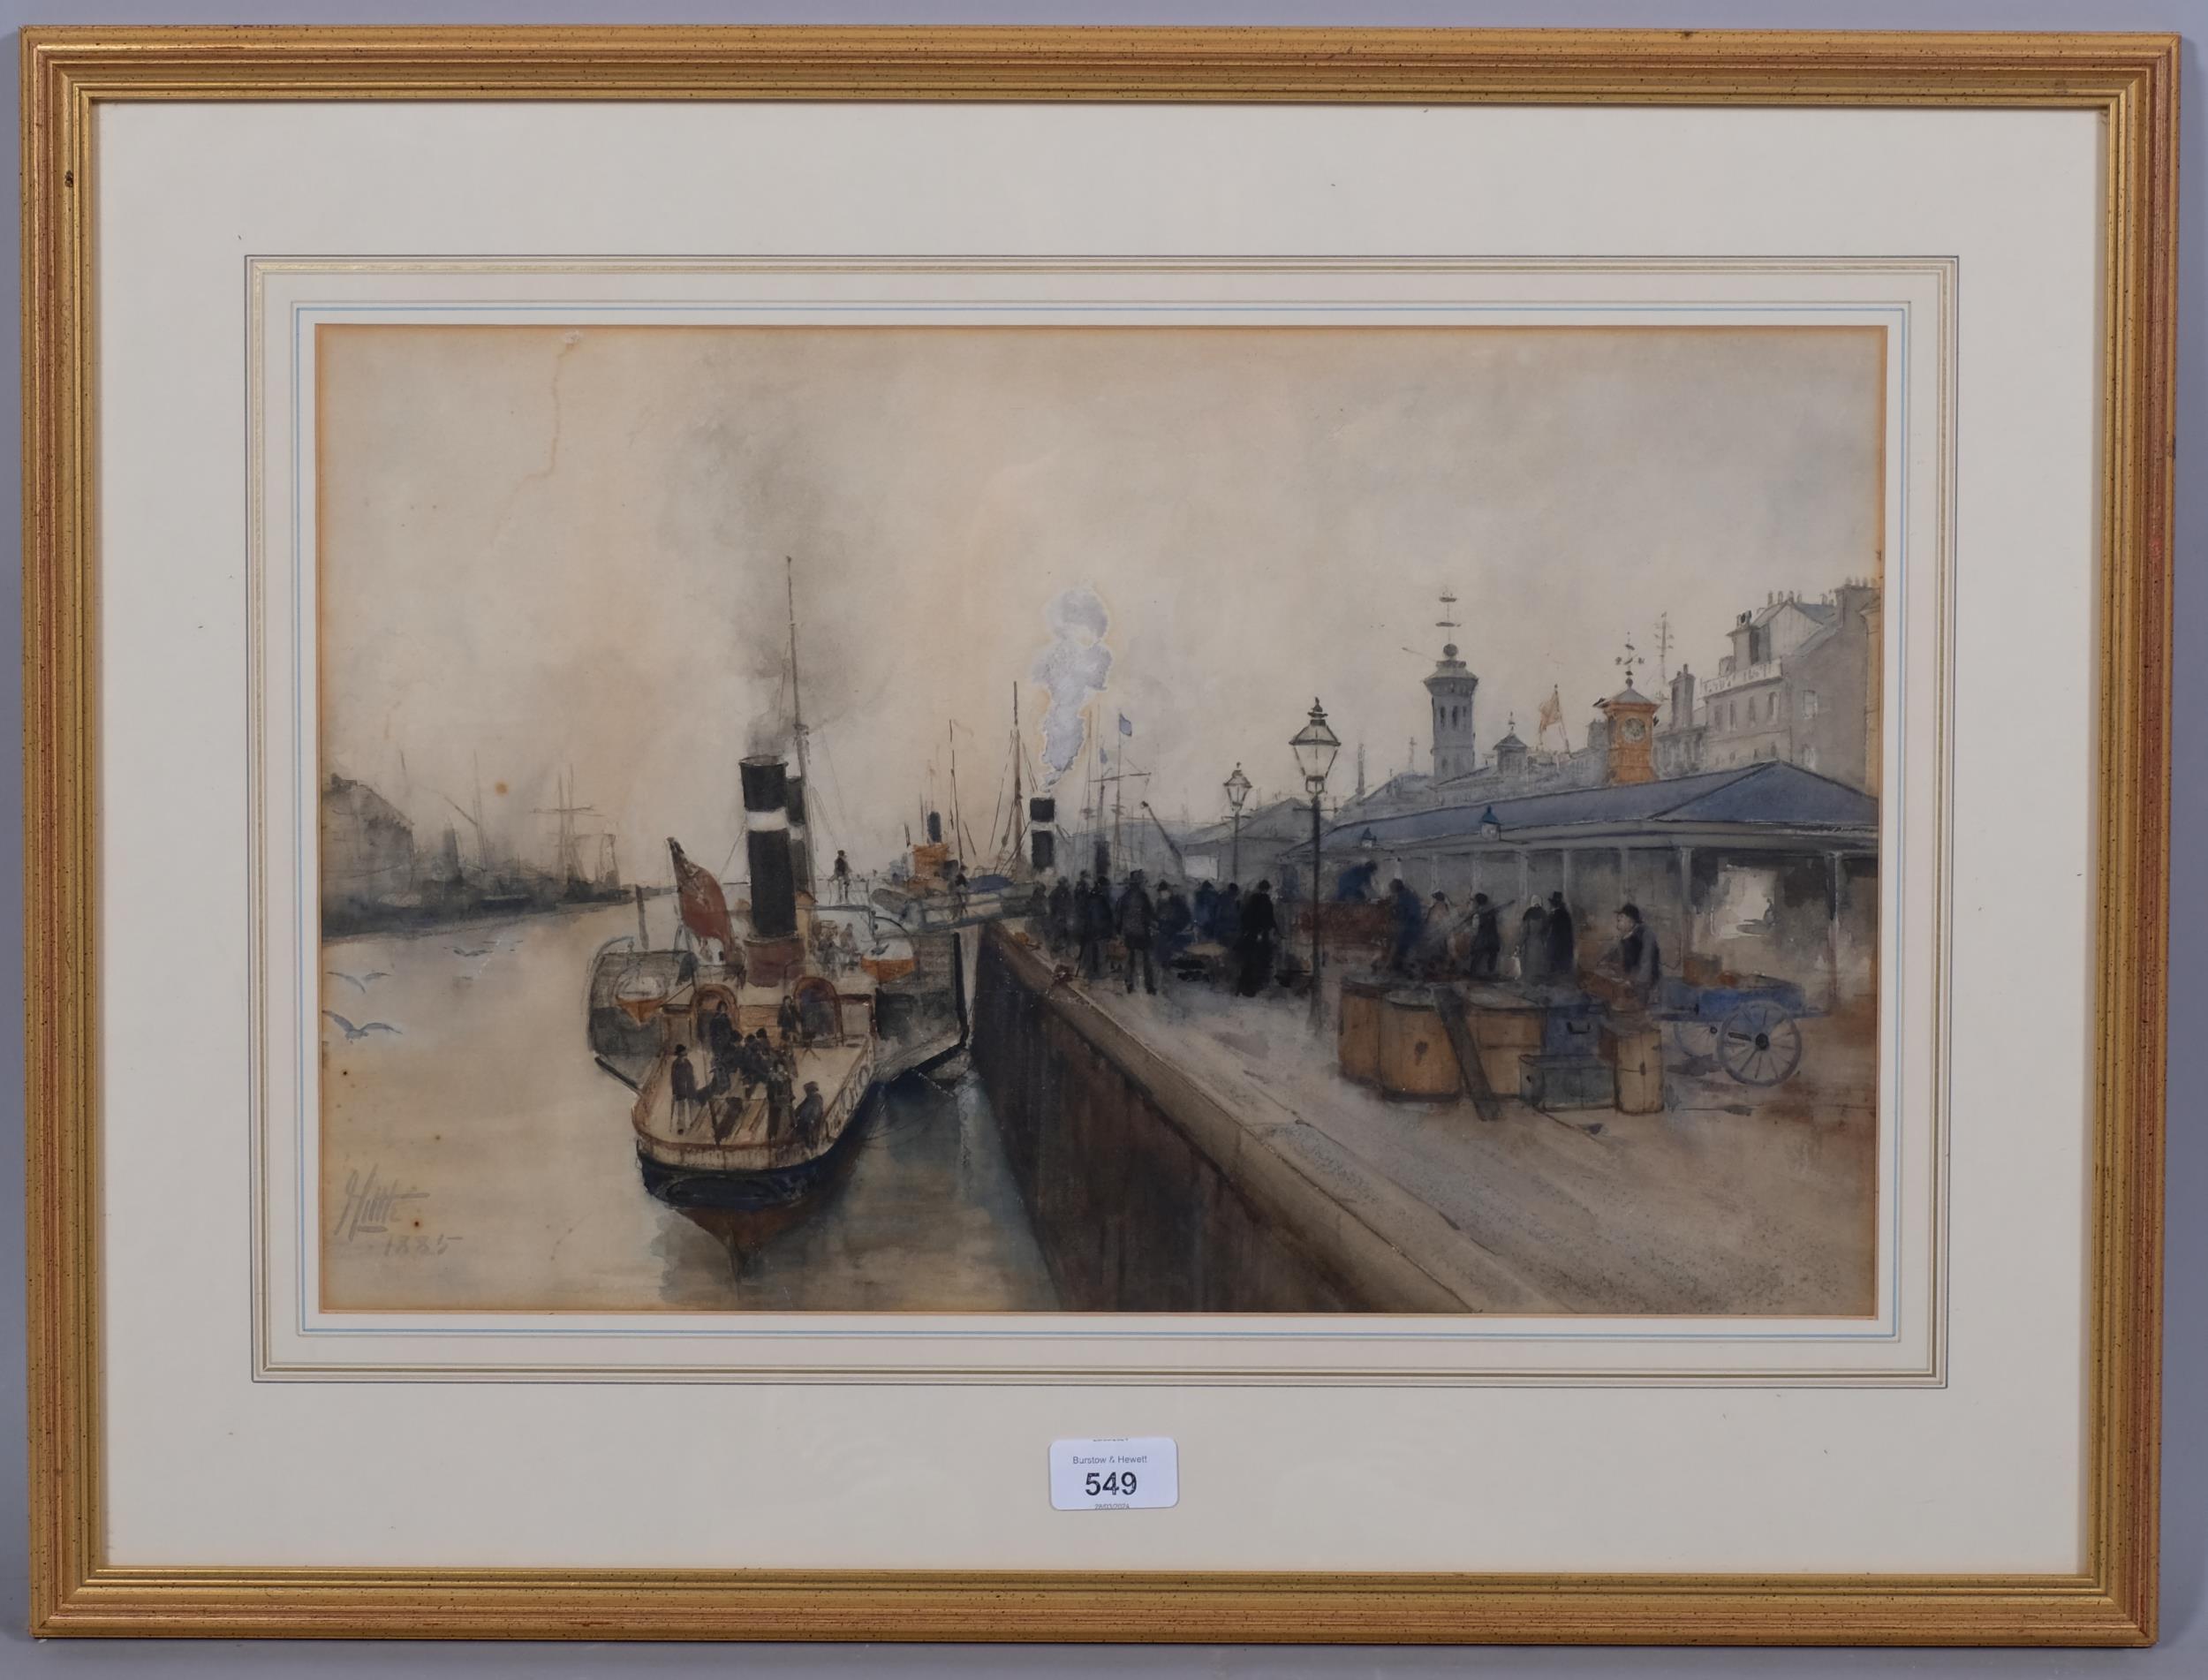 James Little (active 1875 - 1910), passenger quay, watercolour, signed and dated 1885, 29cm x